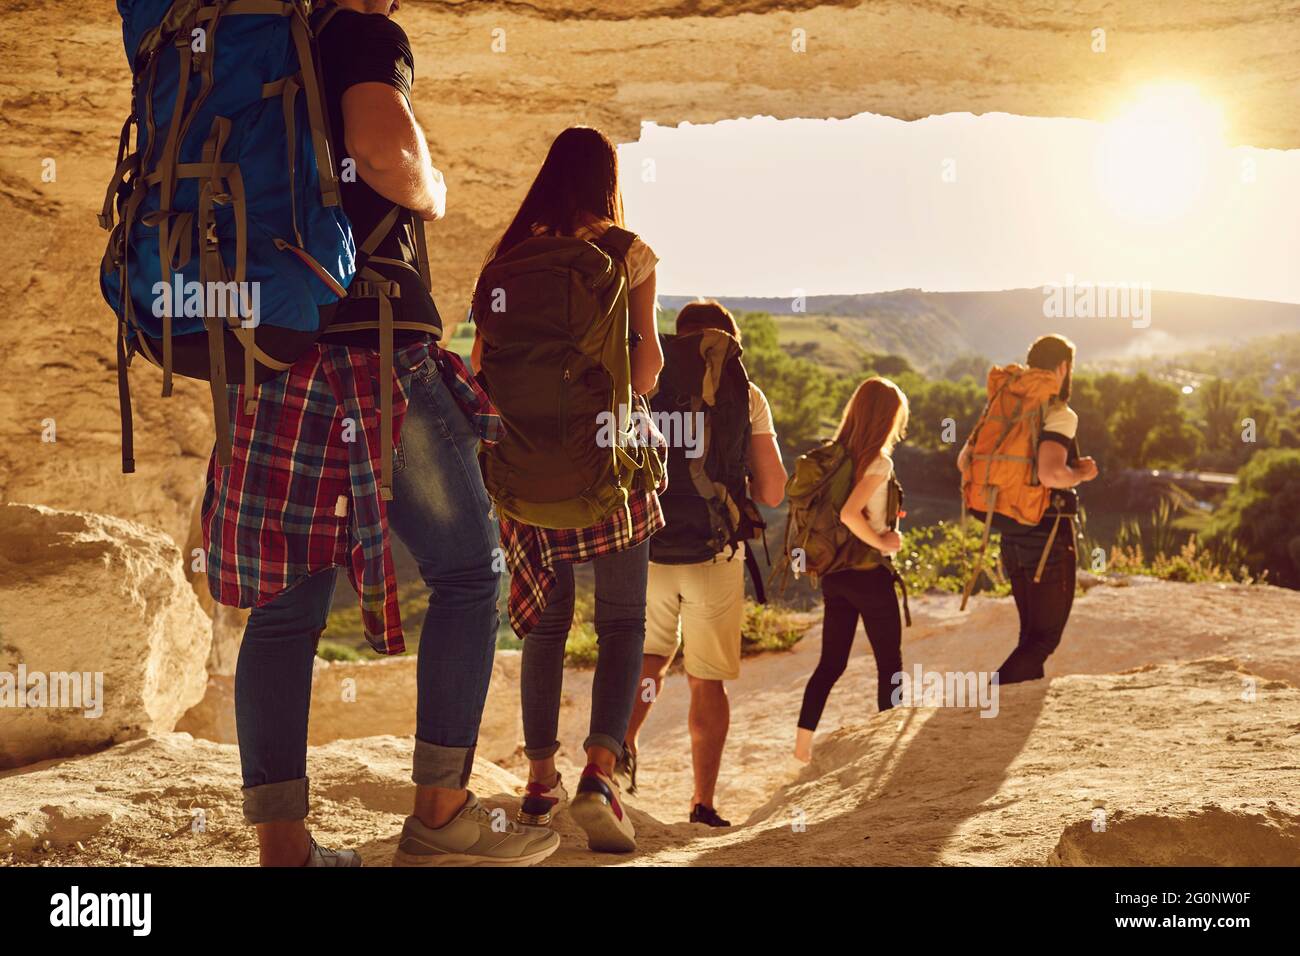 Group of travelers hikers hiking in natural mountaints outdoors with great landscape ahead Stock Photo